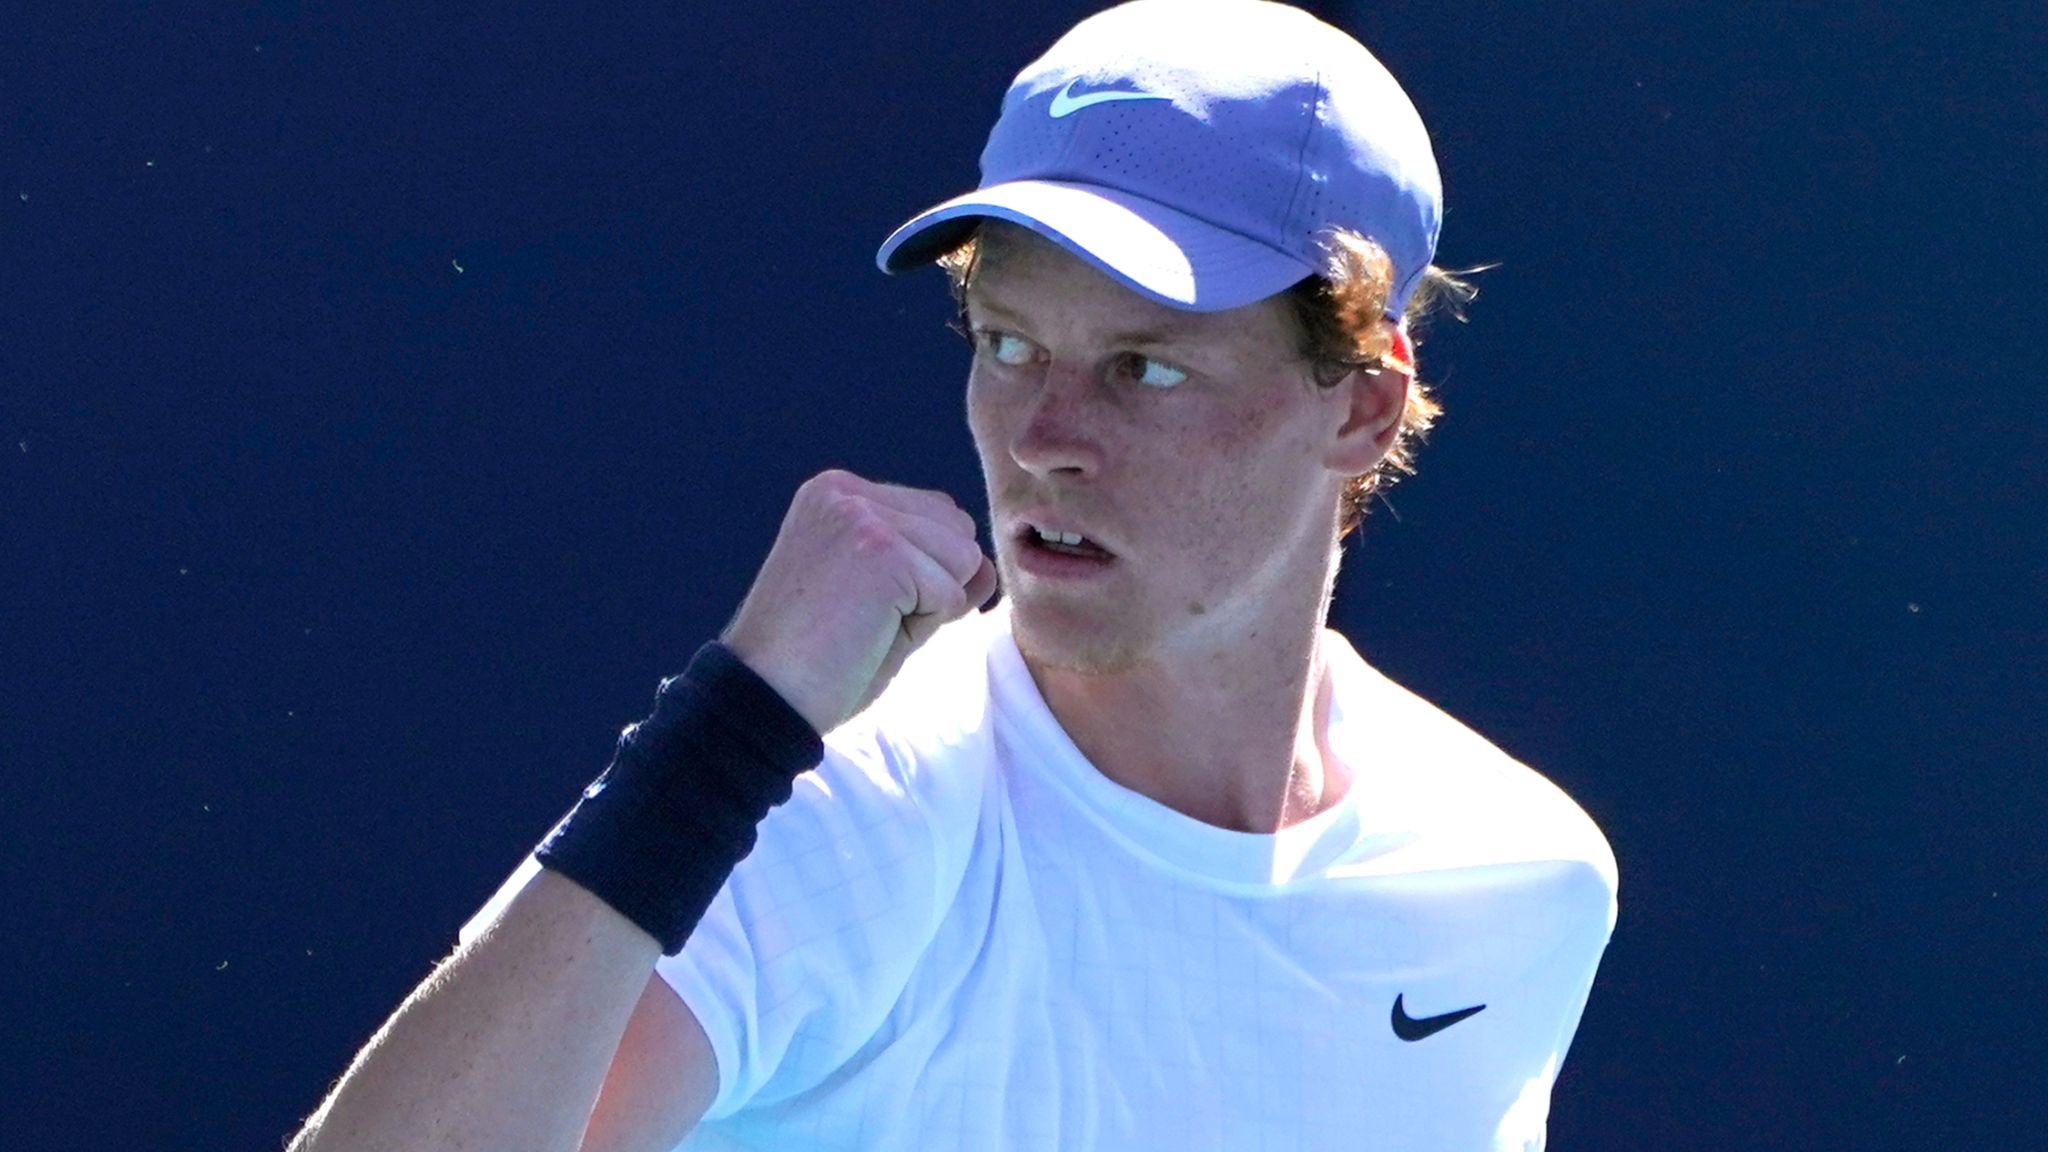 Miami Open Jannik Sinner is fast becoming the next big thing in mens tennis with a rapid rise up the rankings Tennis News Sky Sports